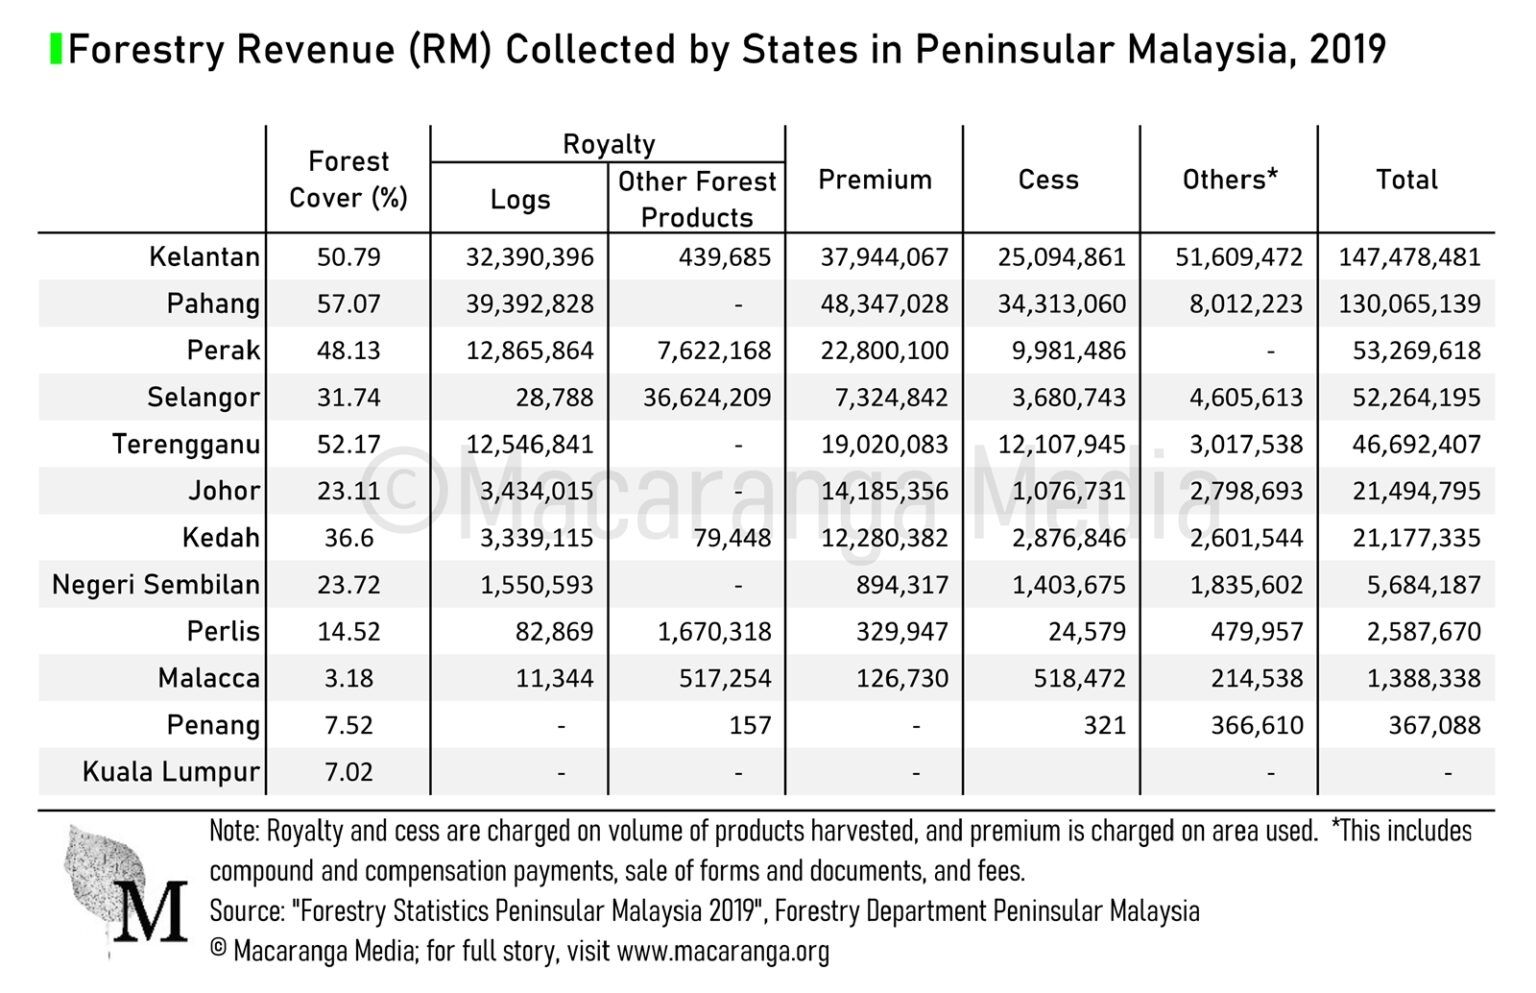 Table 1: Forestry revenue is a key revenue for many states in Peninsular Malaysia. Table courtesy of Macarenga.